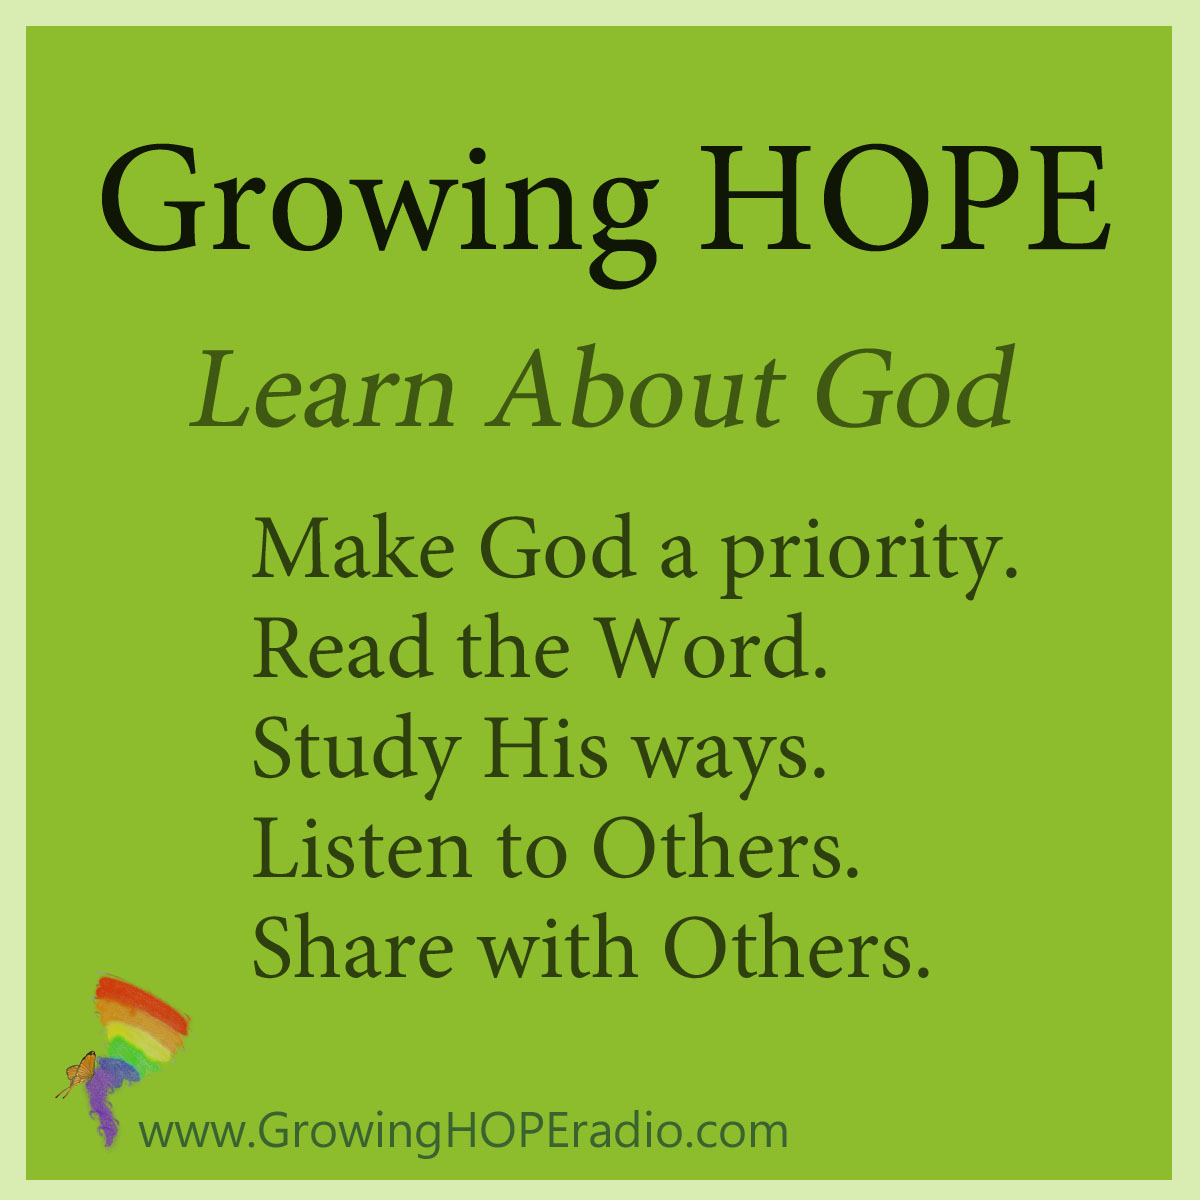 #GrowingHOPE daily - 5 points - learn about God